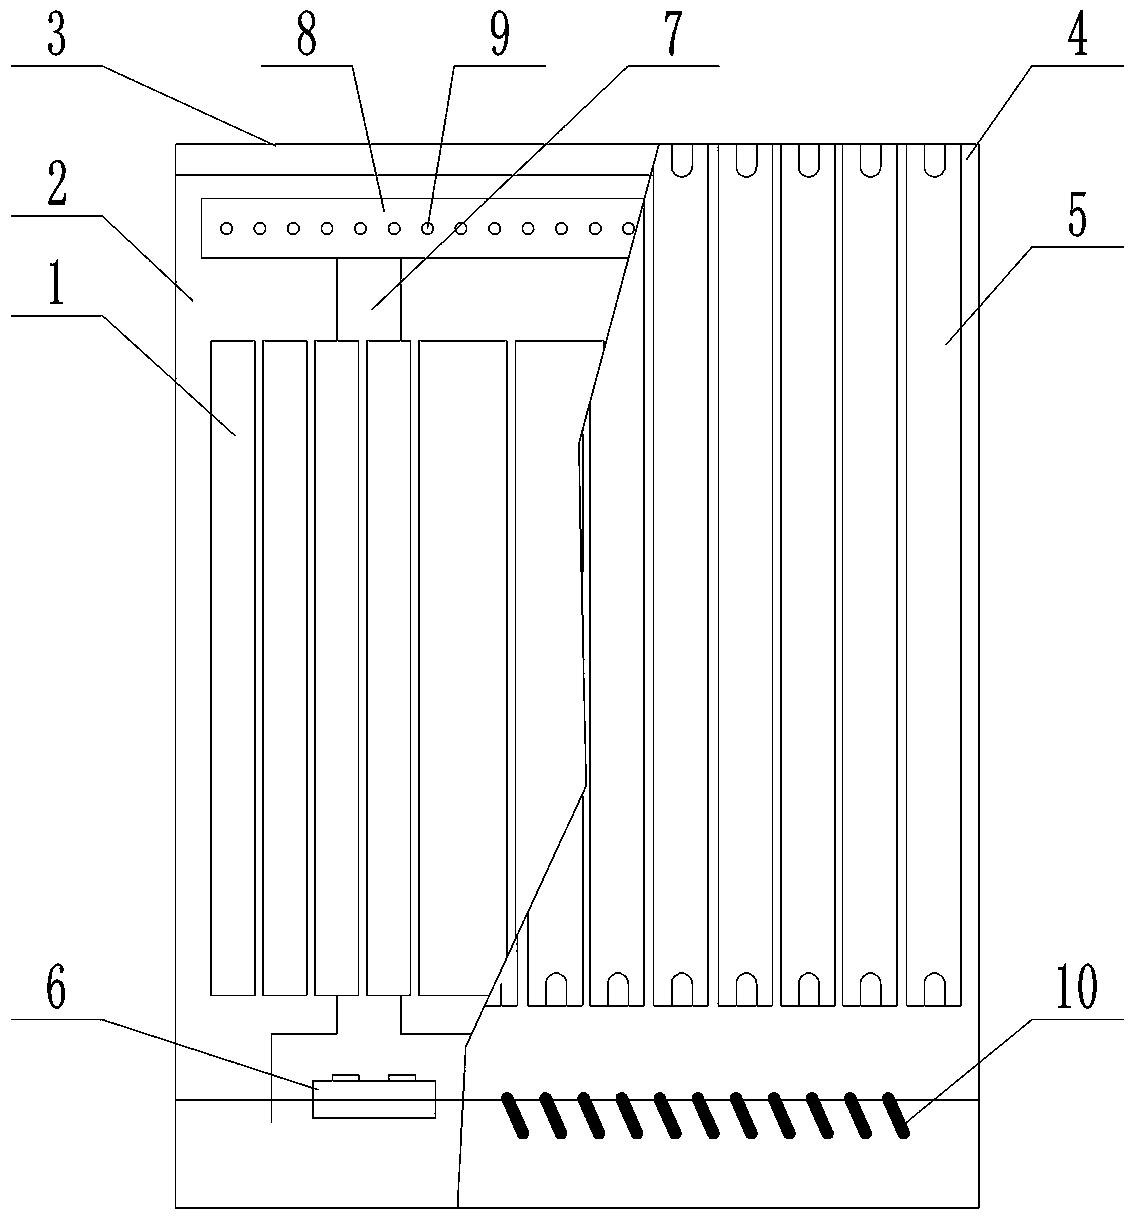 Cabinet and server cooling device